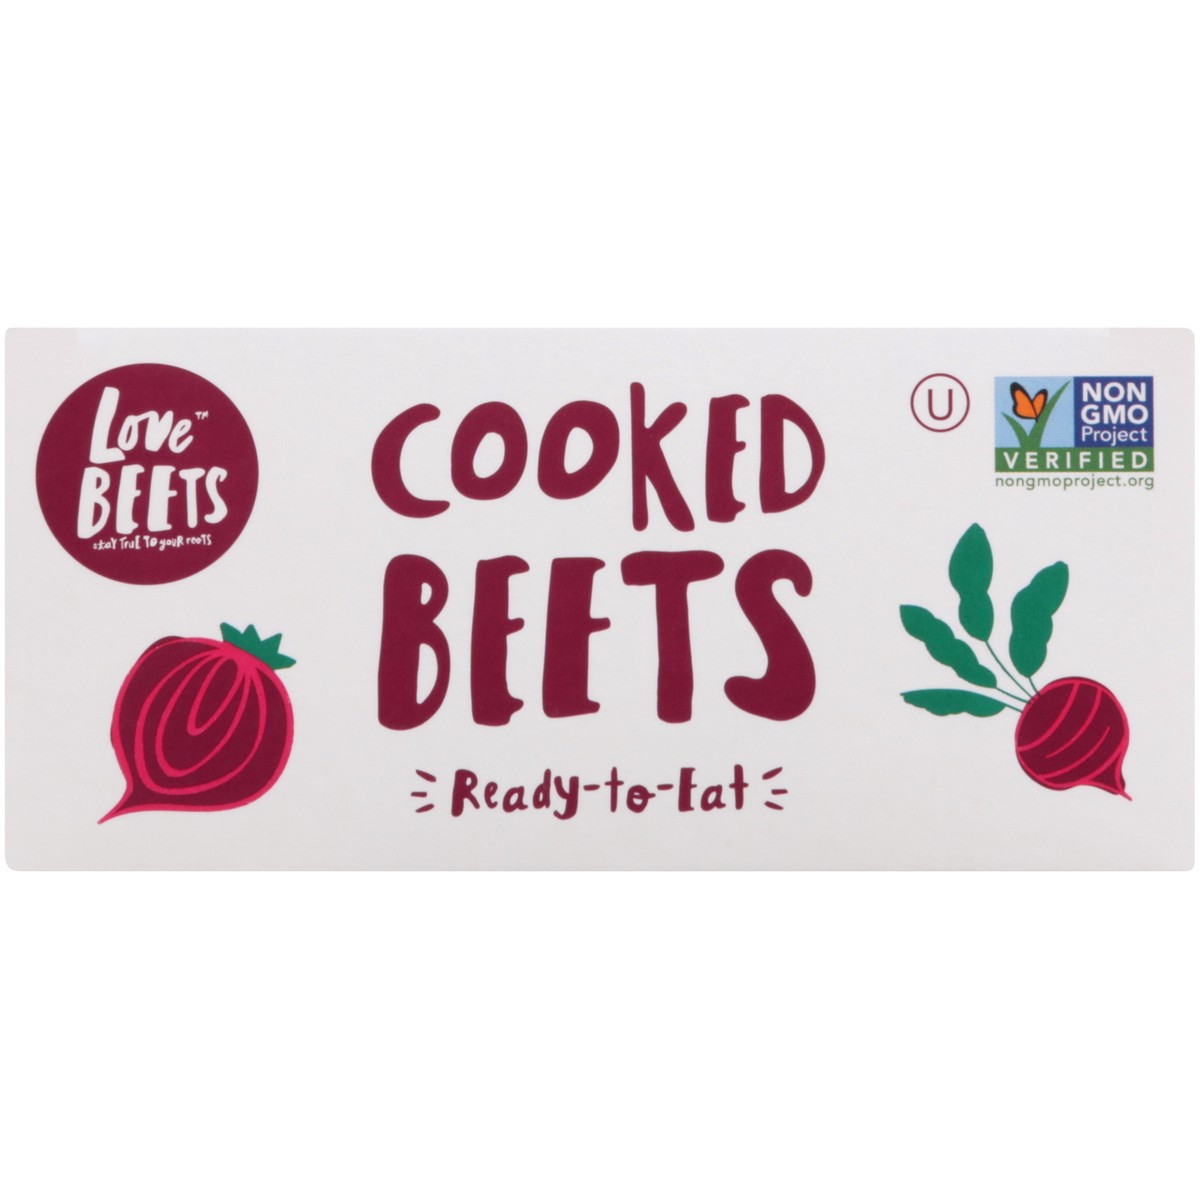 slide 9 of 9, Love Beets Cooked Beets 8.8 oz. Box, 8.8 oz